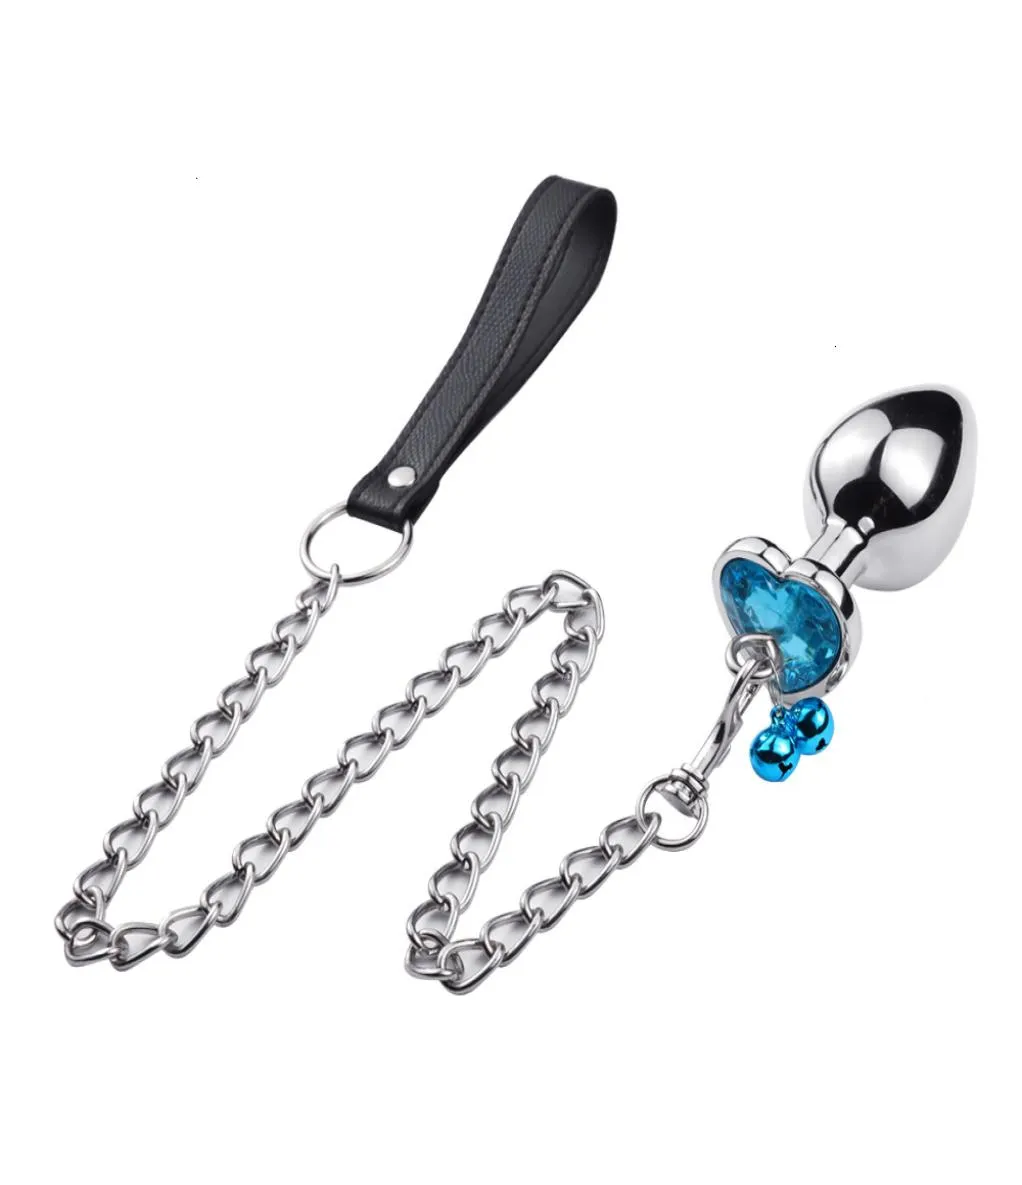 Leash Chain Anal Plug with Bell Adult BDSM Games Stainless steel Crystal Heart Anal Sex Butt Plug Stimulator Sex Toys For Wome Y196739020